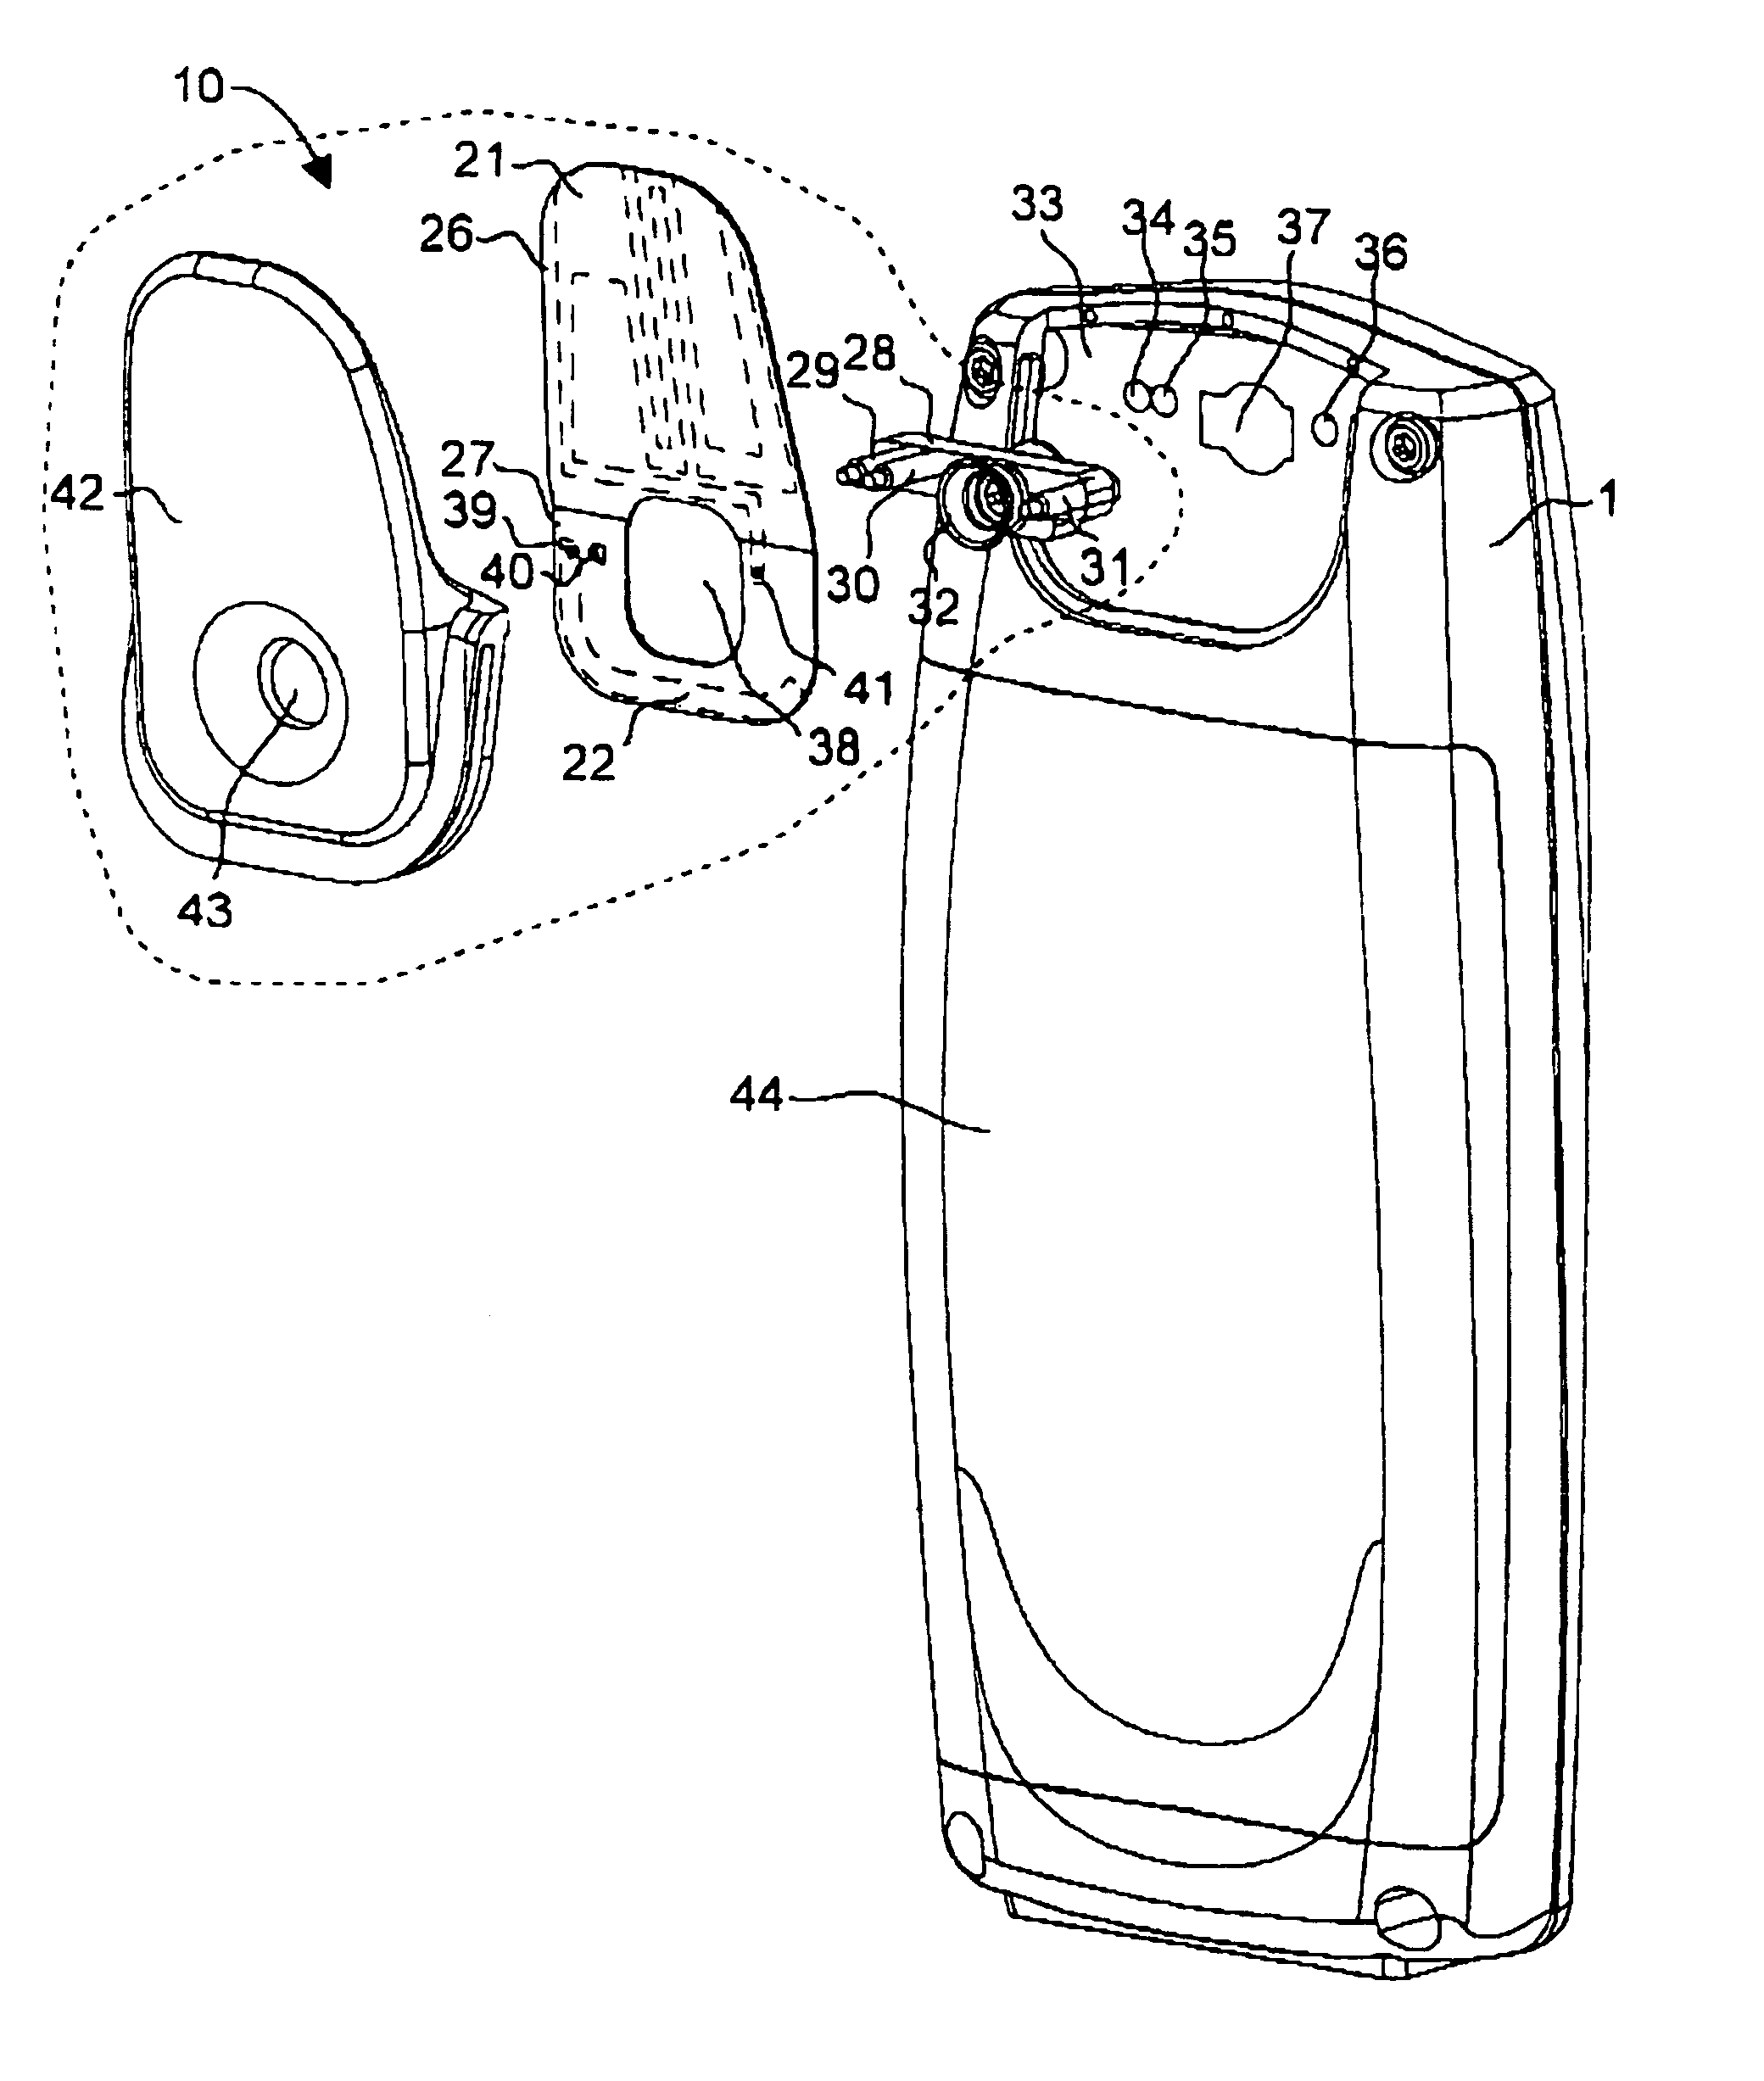 Antenna device, and a portable telecommunication apparatus including such an antenna device